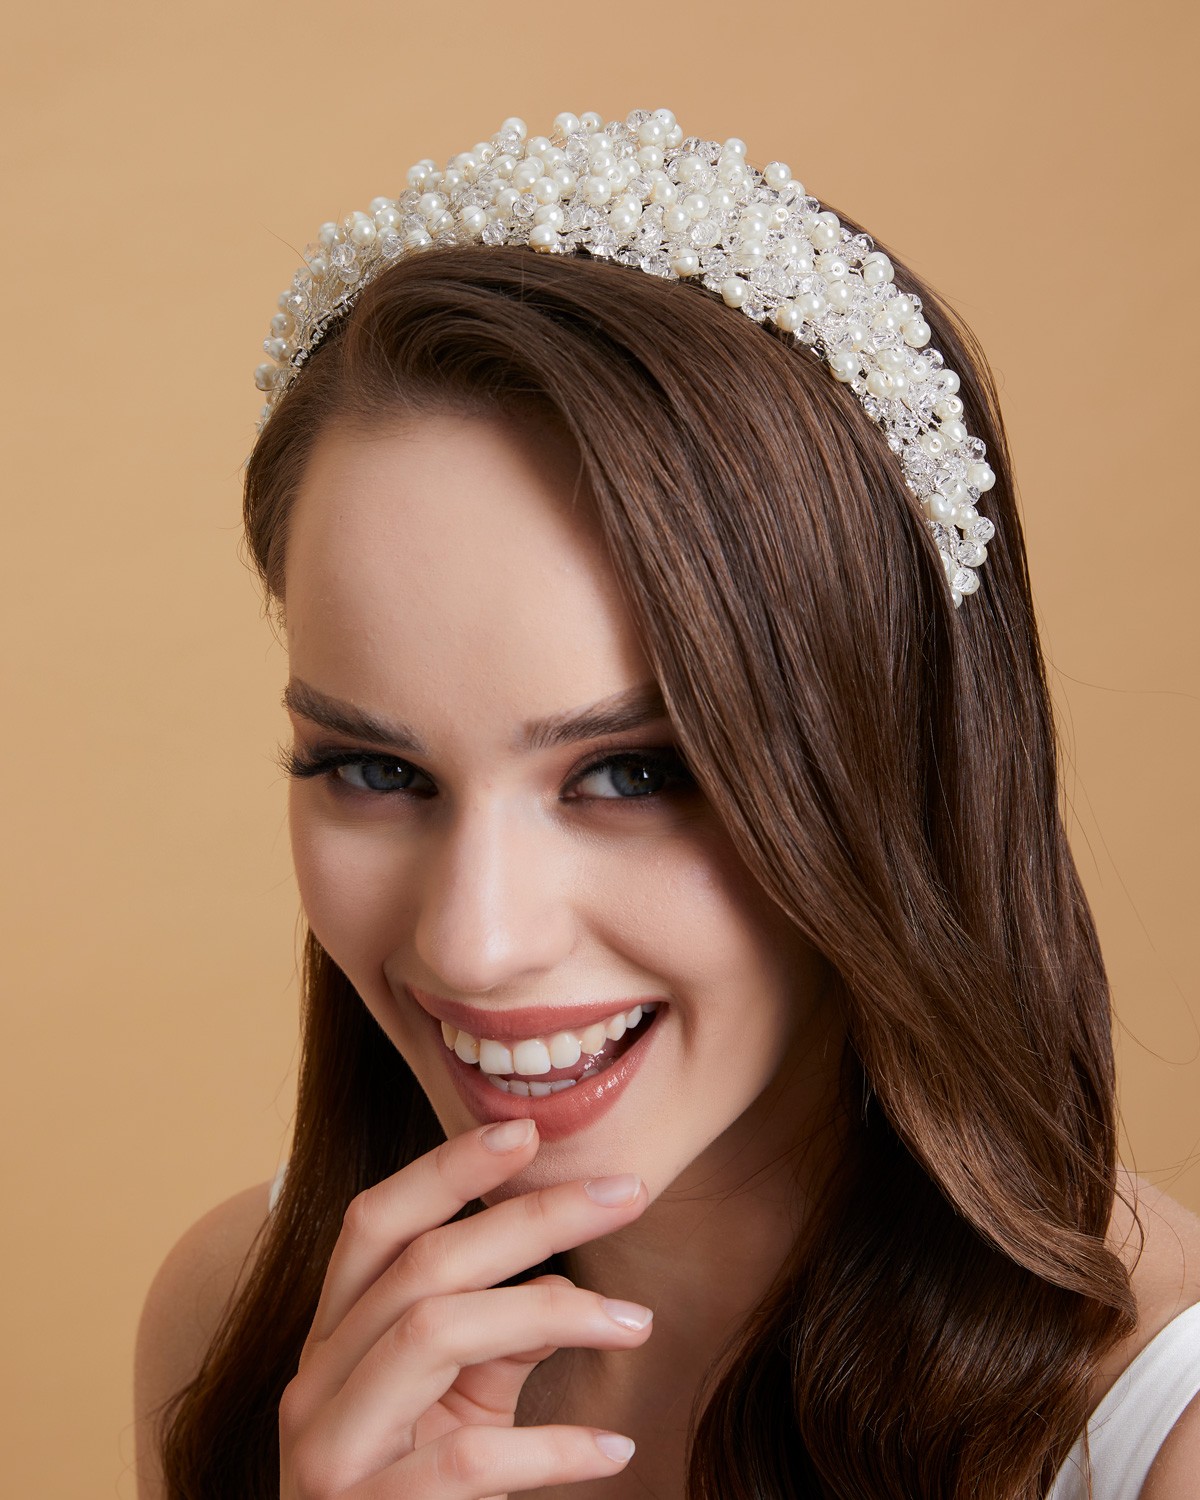 Arzu Pearly Crystal Stone Hair Band Buy Now.